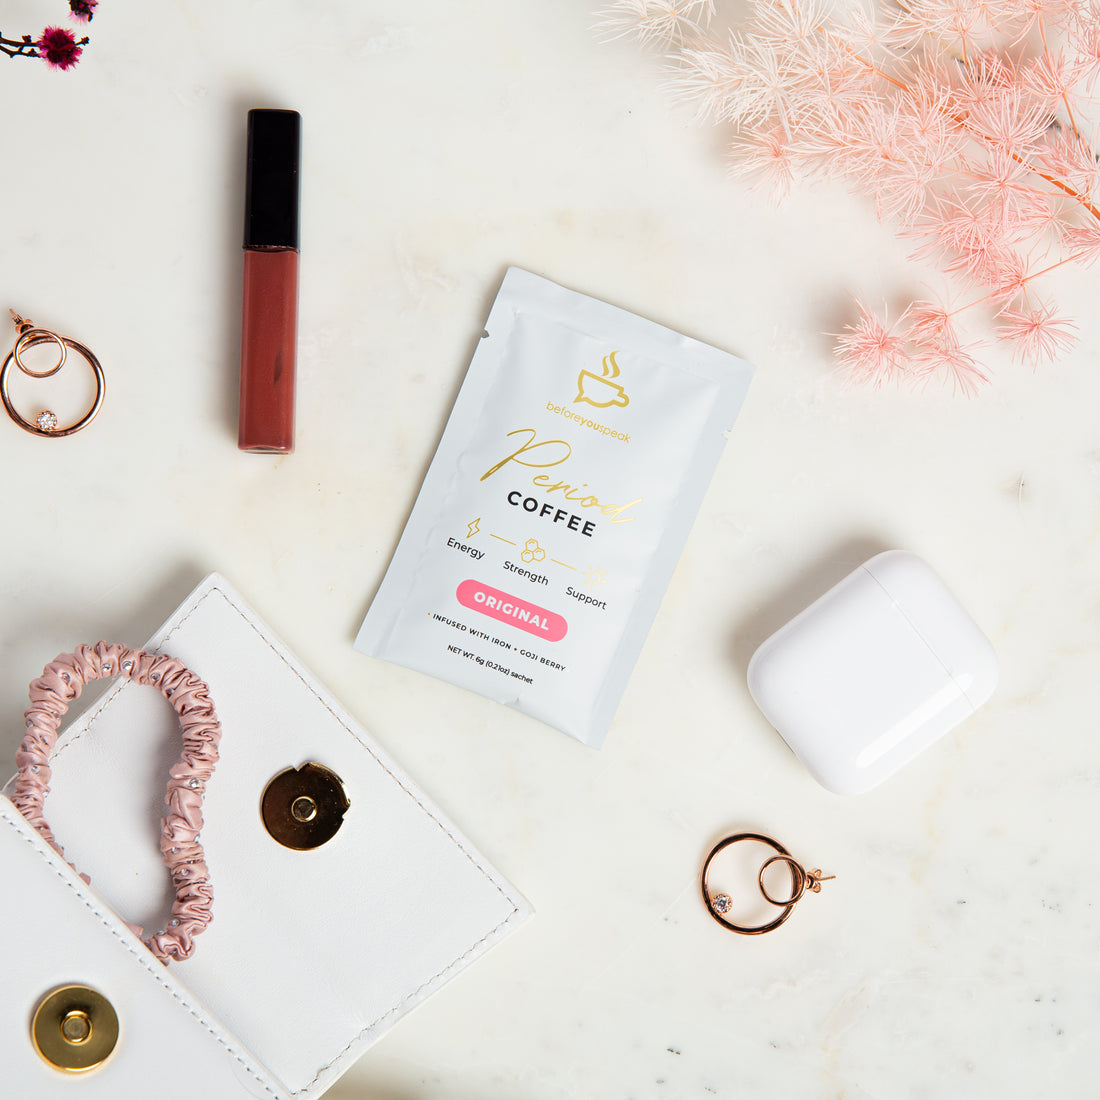 Period Coffee - Energy, Strength, Support